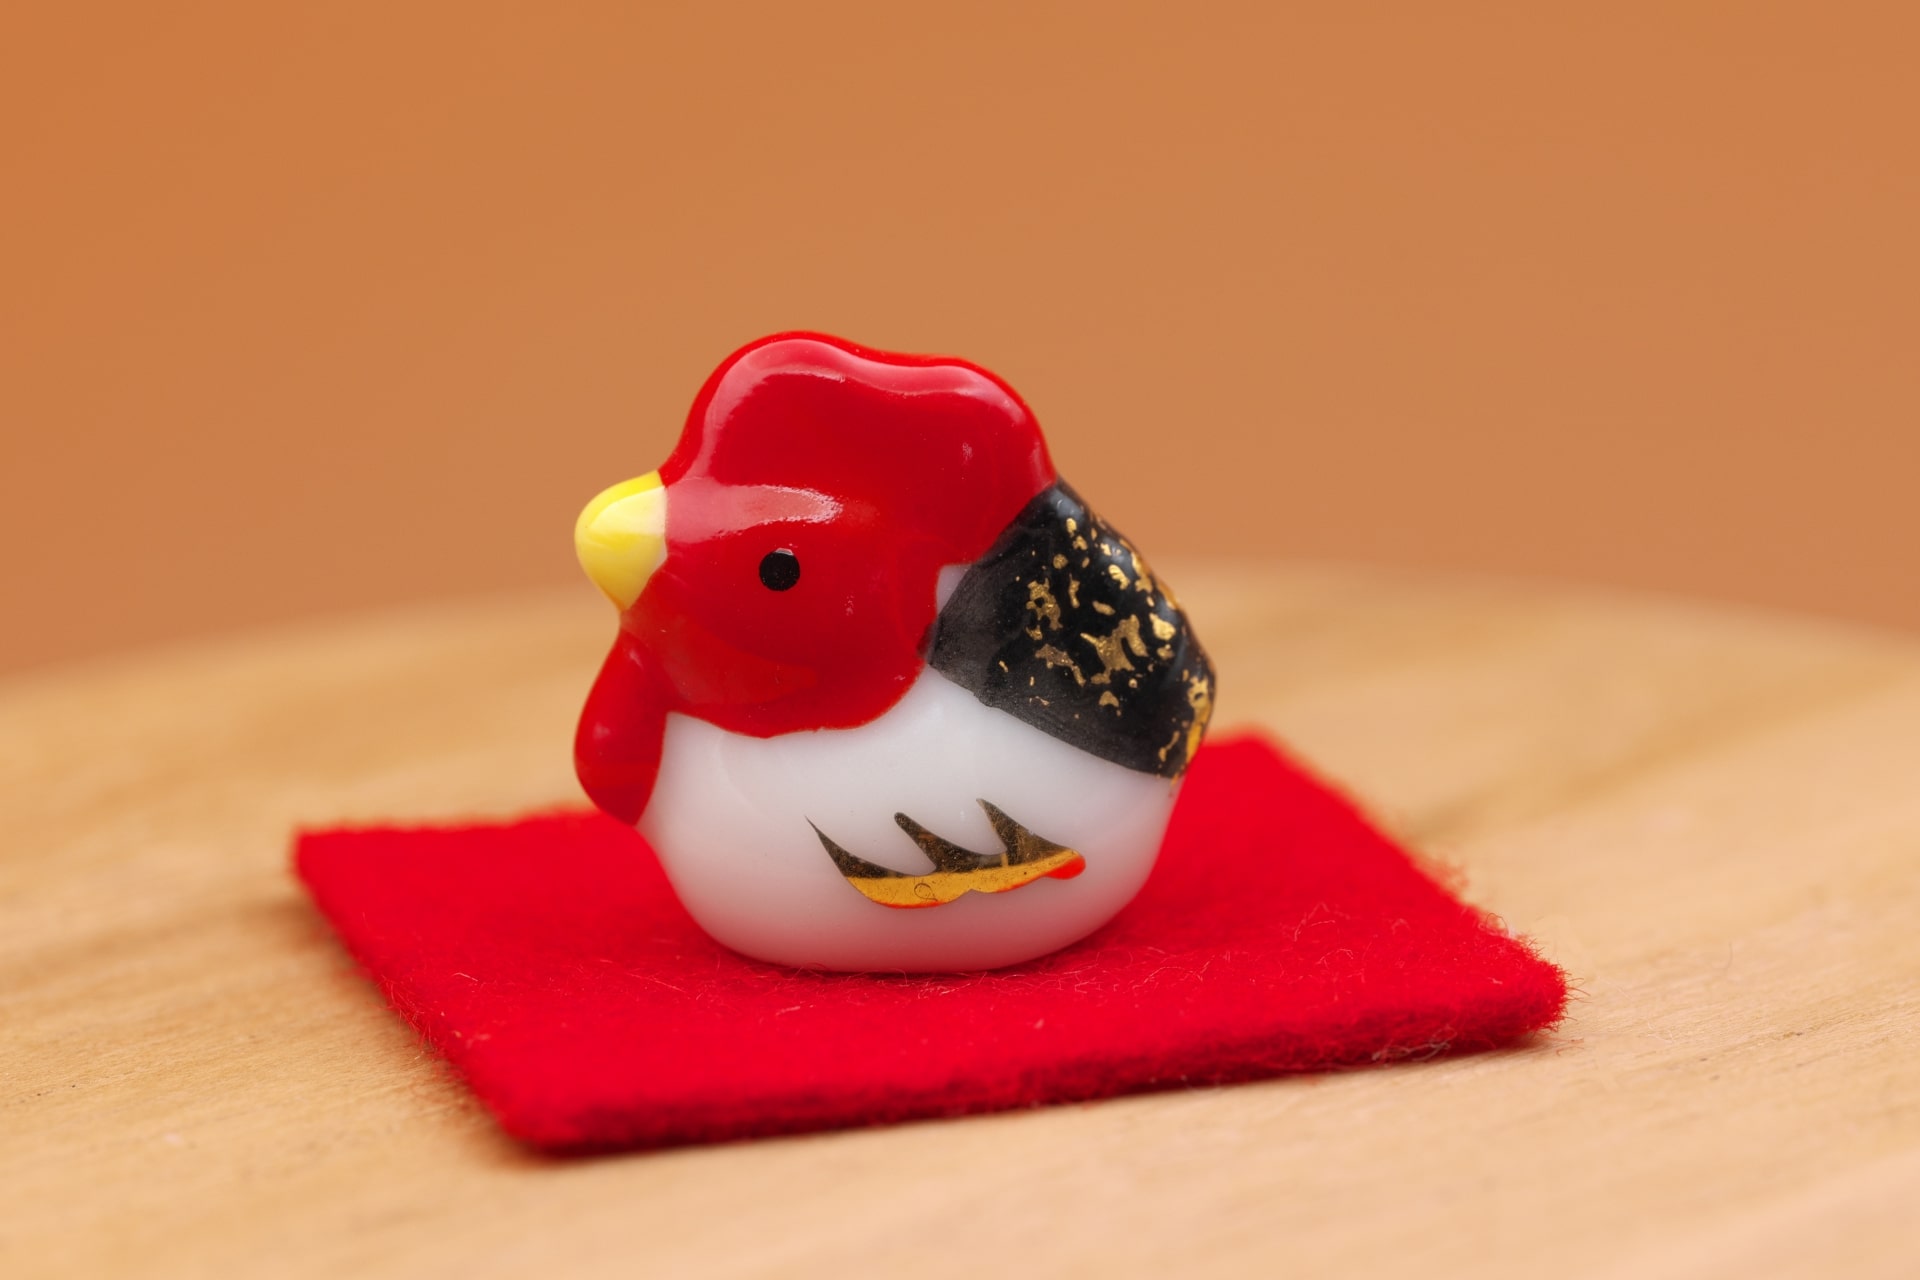 Small figurine depicting the rooster from Chinese Zodiac